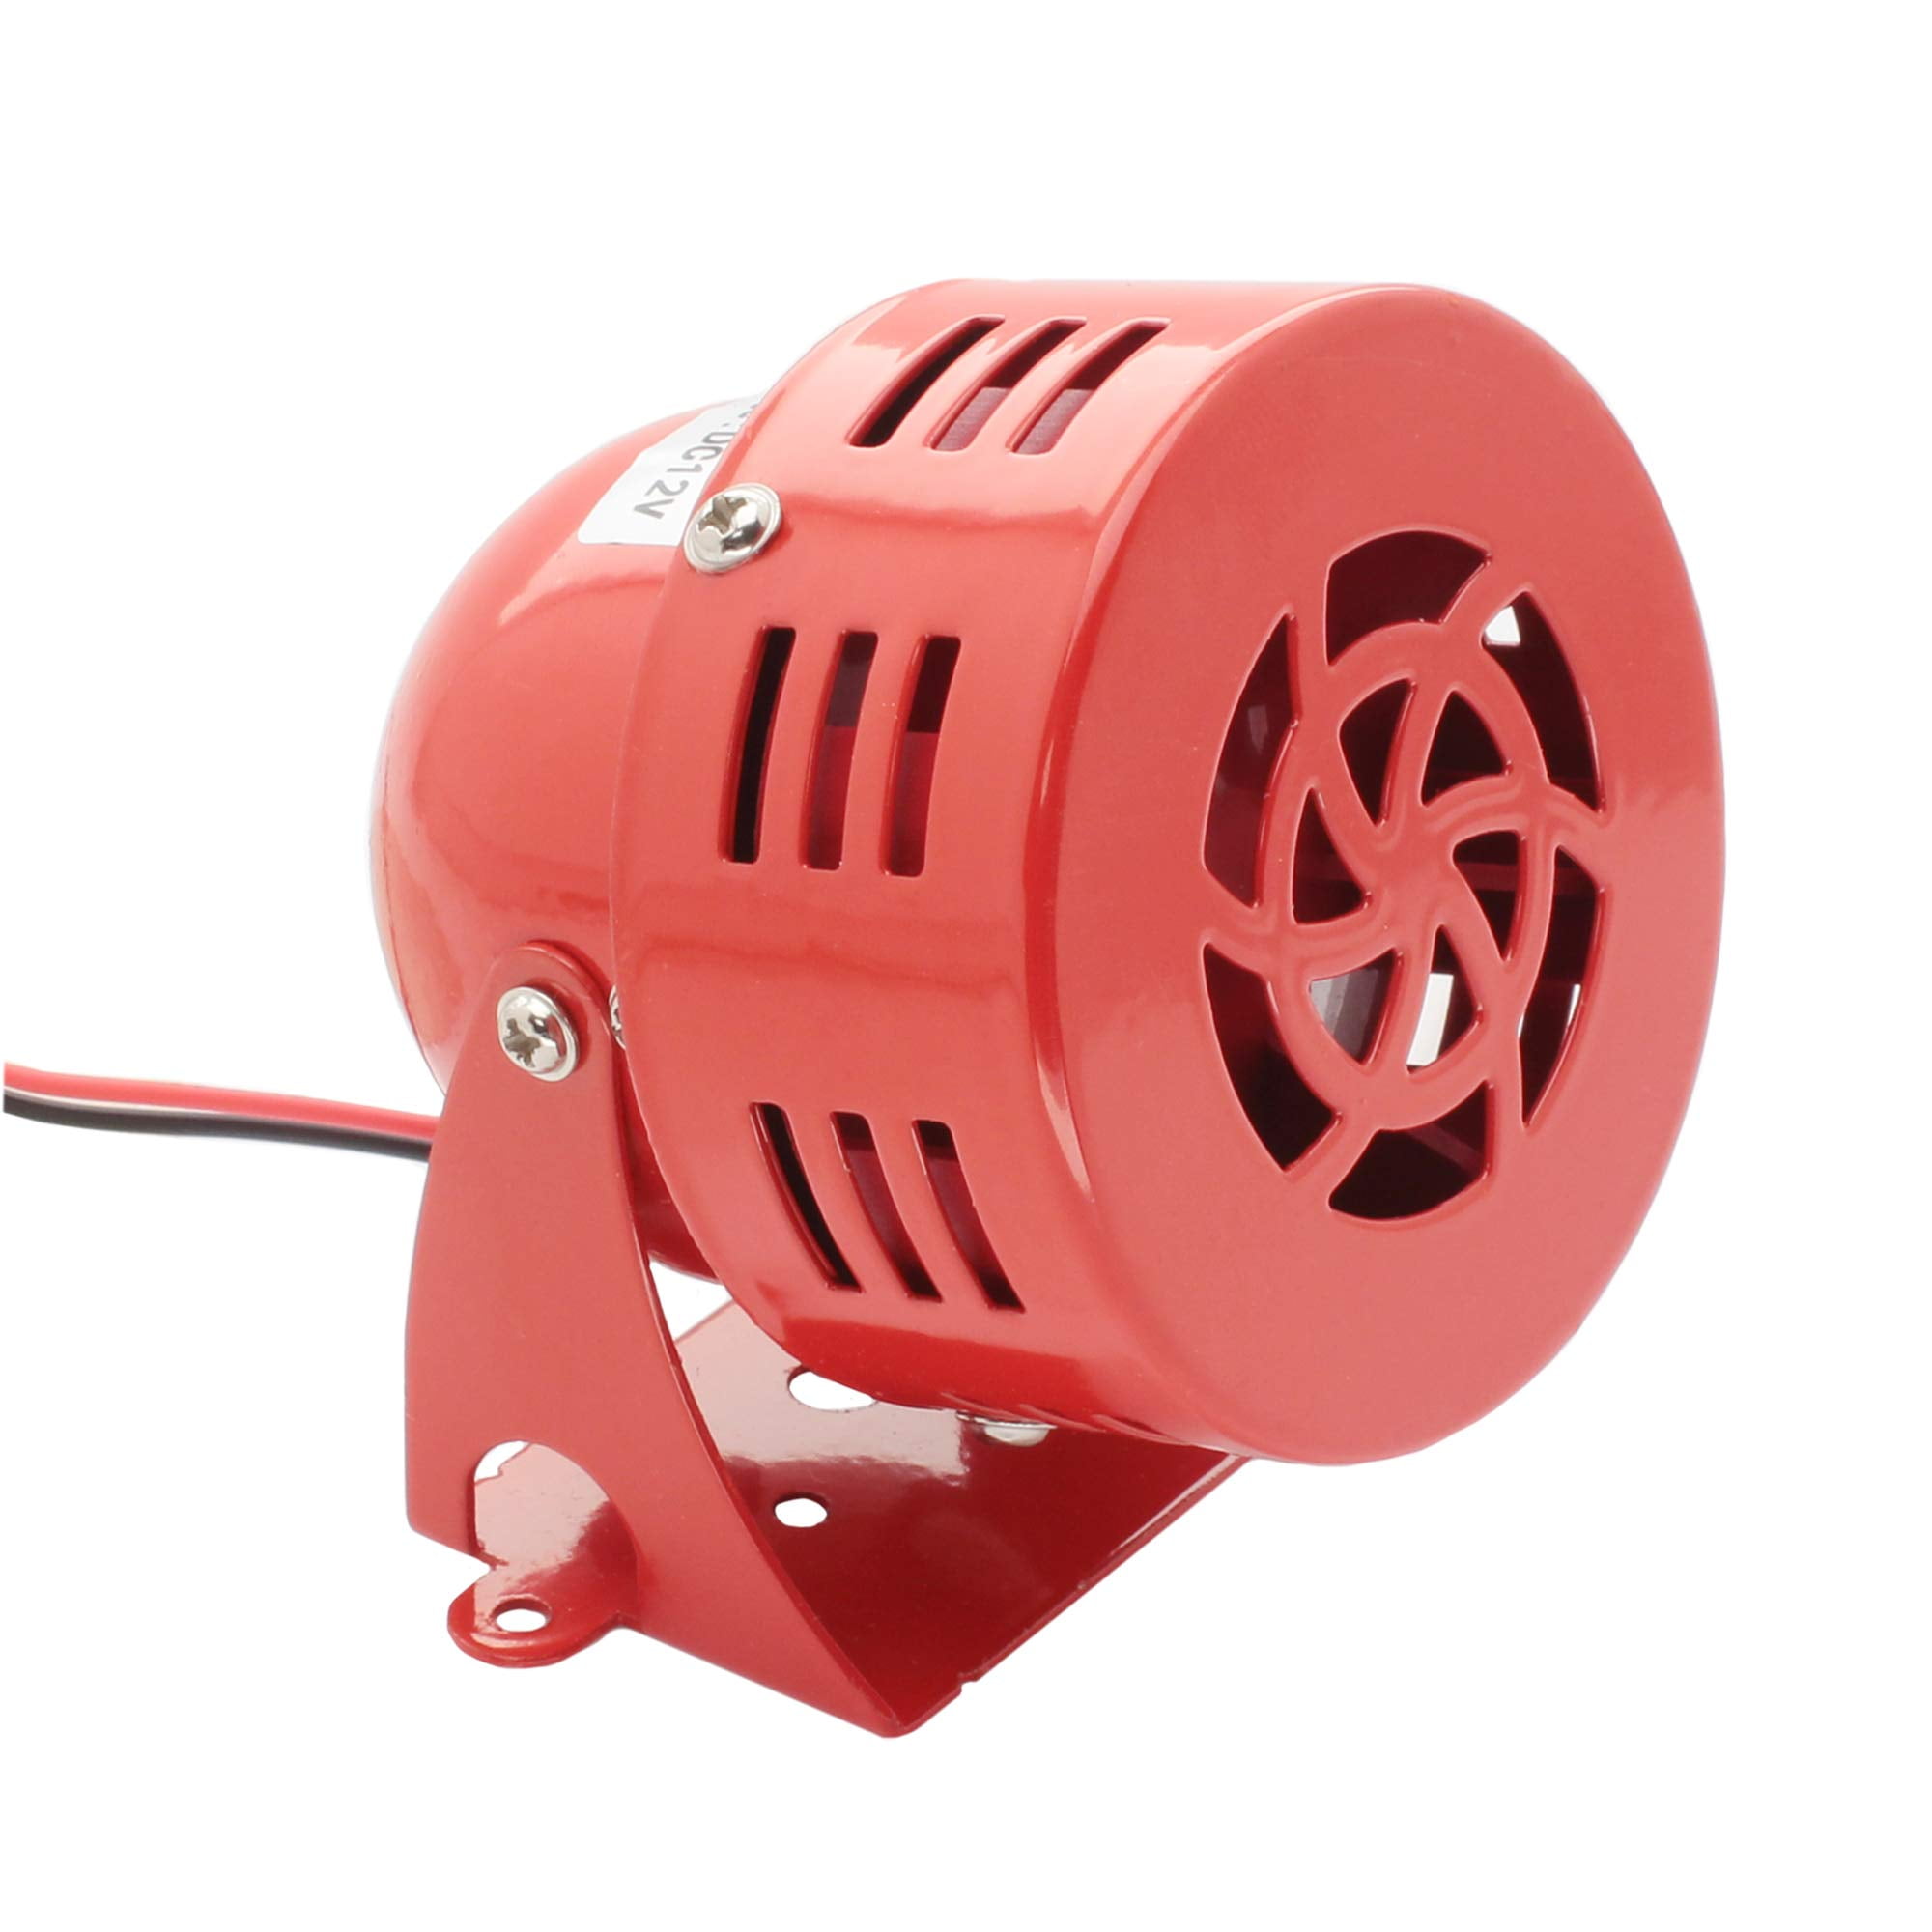 uxcell 12V Electric Car Truck Motorcycle Driven Siren Horn Loud Alarm Red 